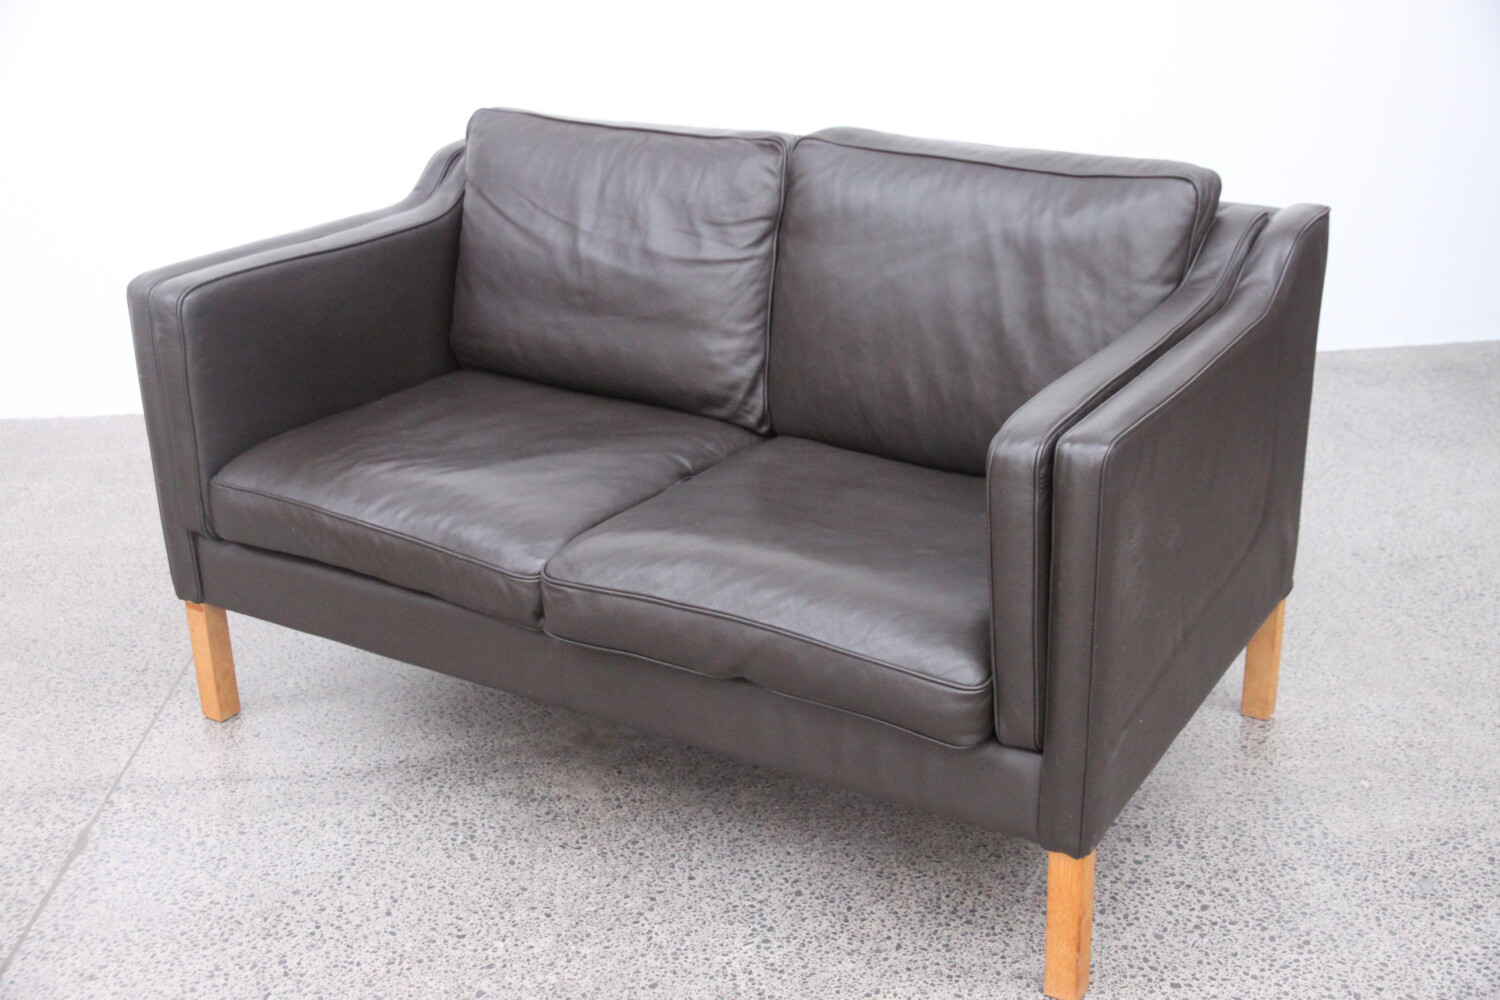 Pair of Leather Sofas